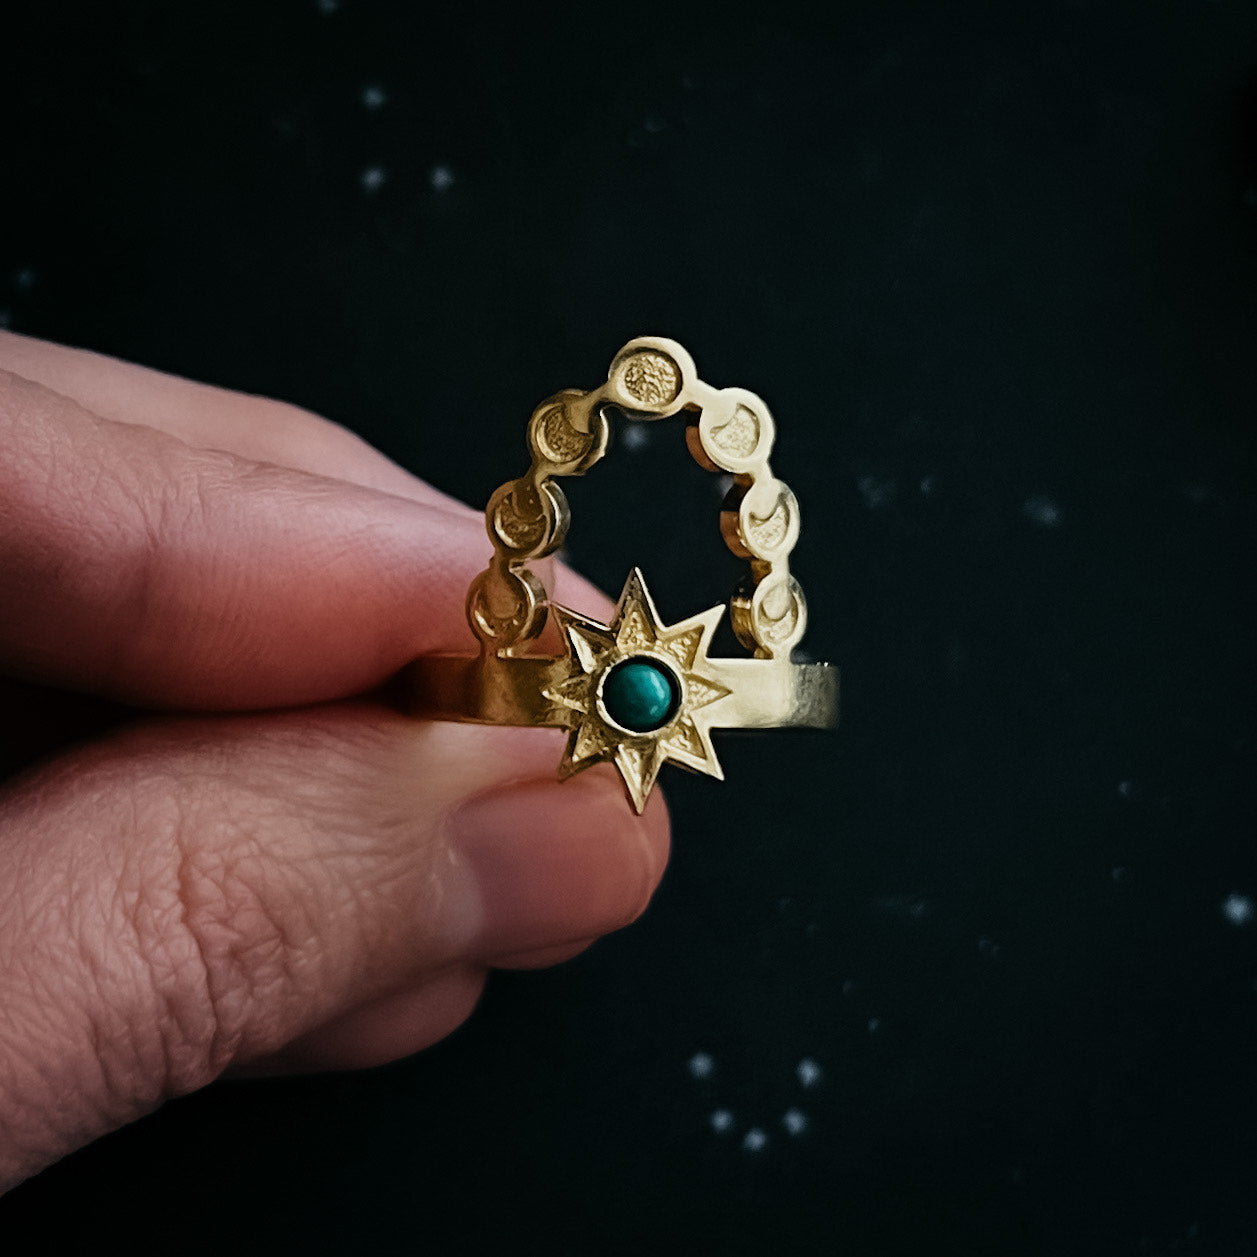 Cosmic Dance Ring with Turquoise, Moon Phases, and Sun Ring Yugen Handmade Gold  